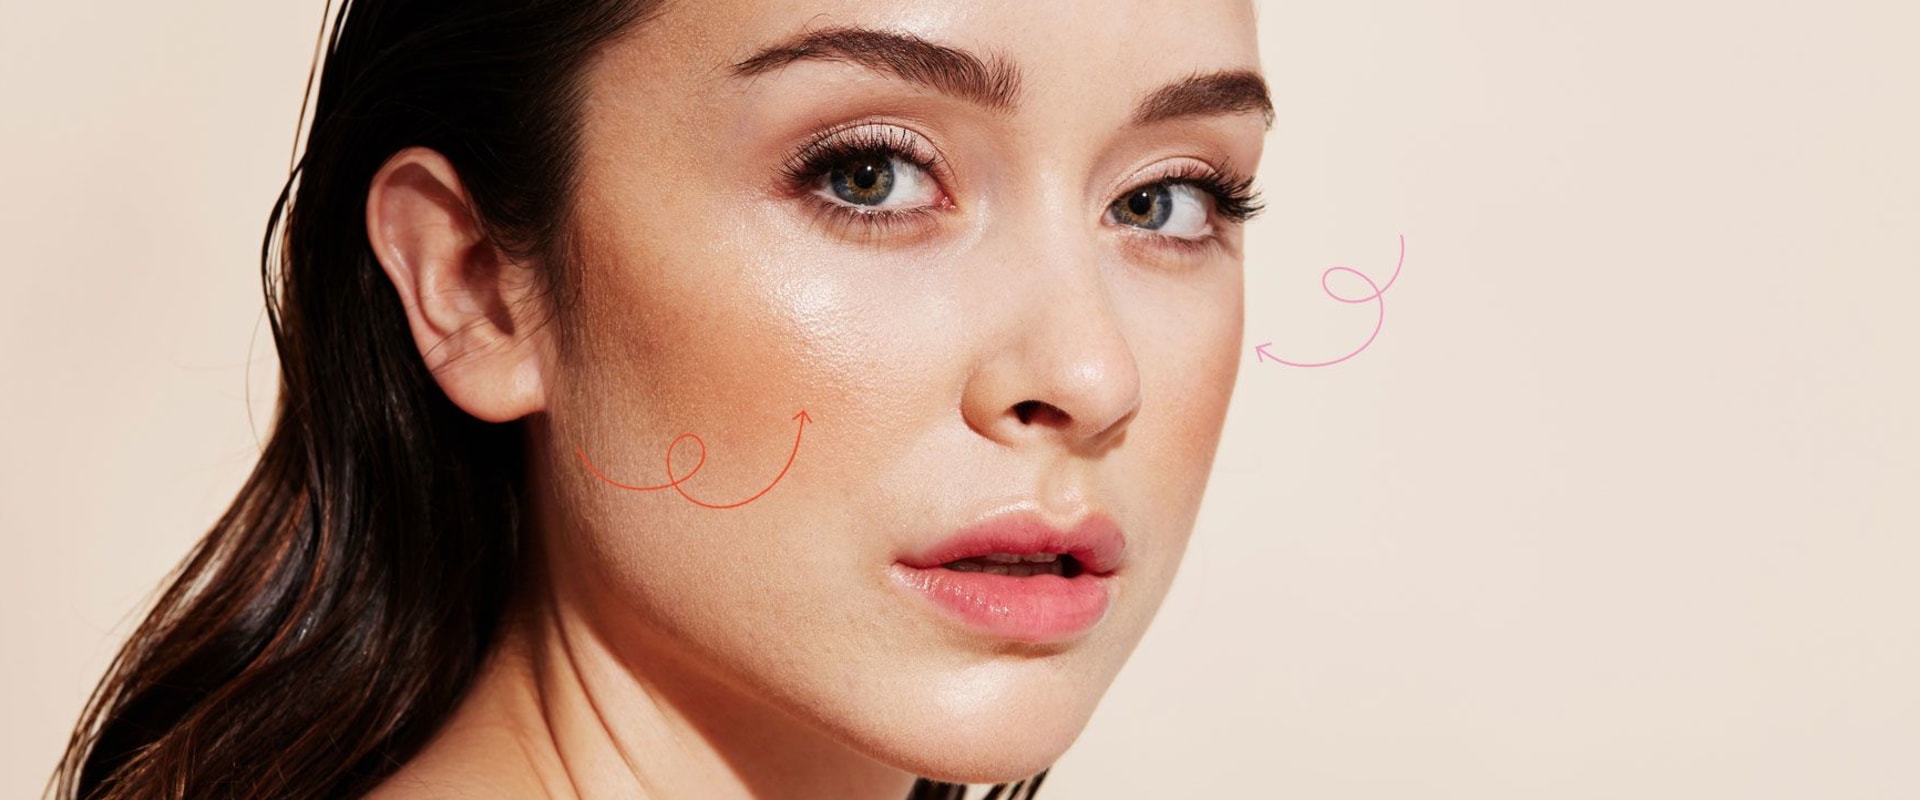 The Best Fillers for Cheeks and Lips: What You Need to Know